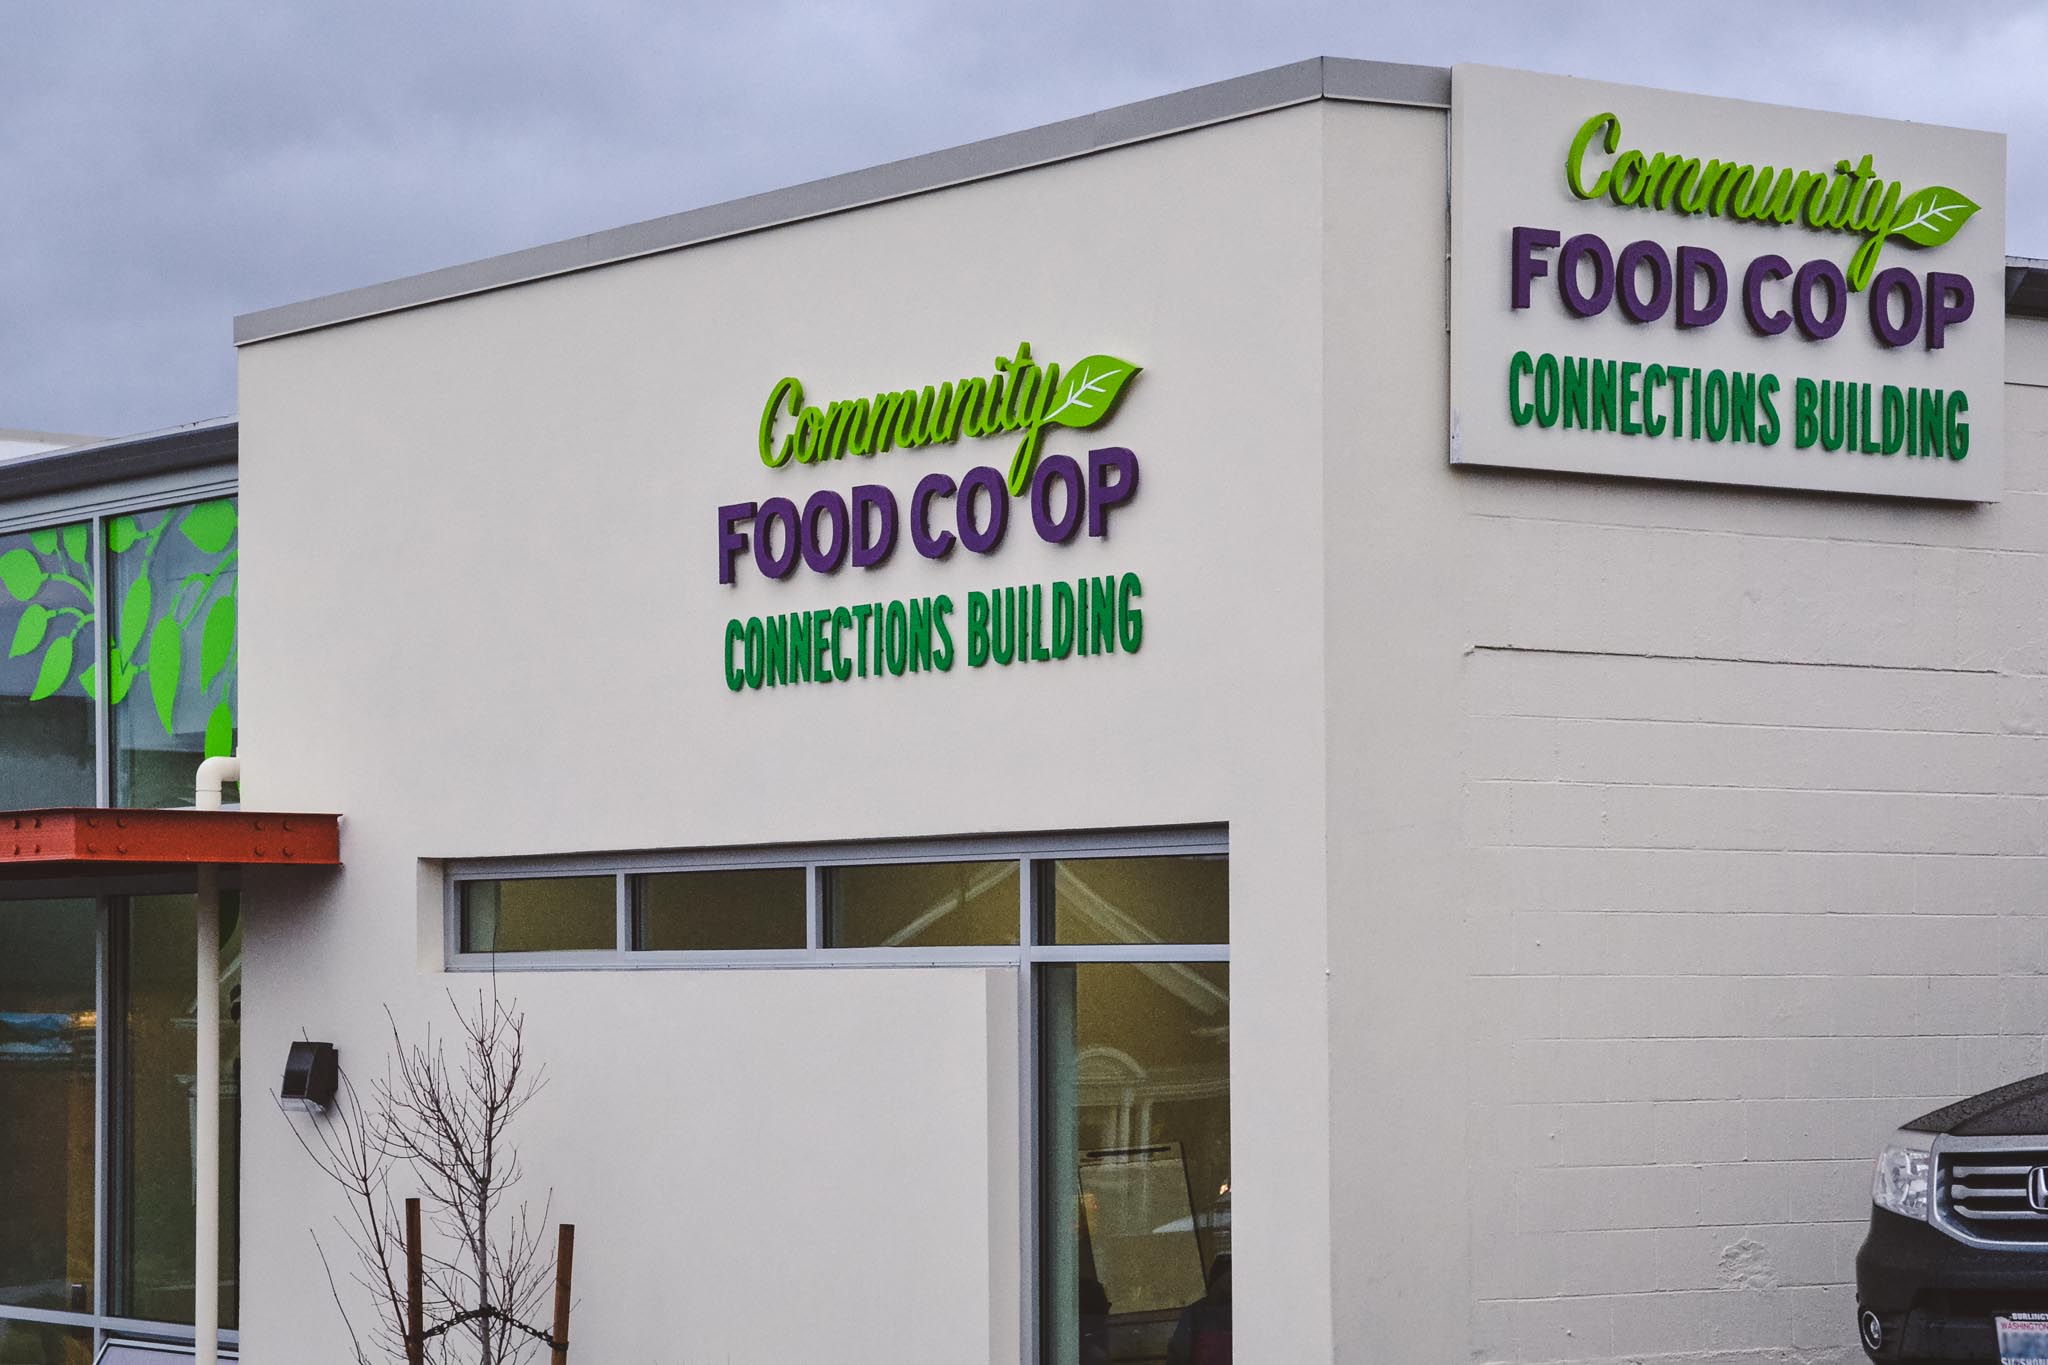 grocery-community-food-co-op-dimensional-nonilluminated-letter-building-signage